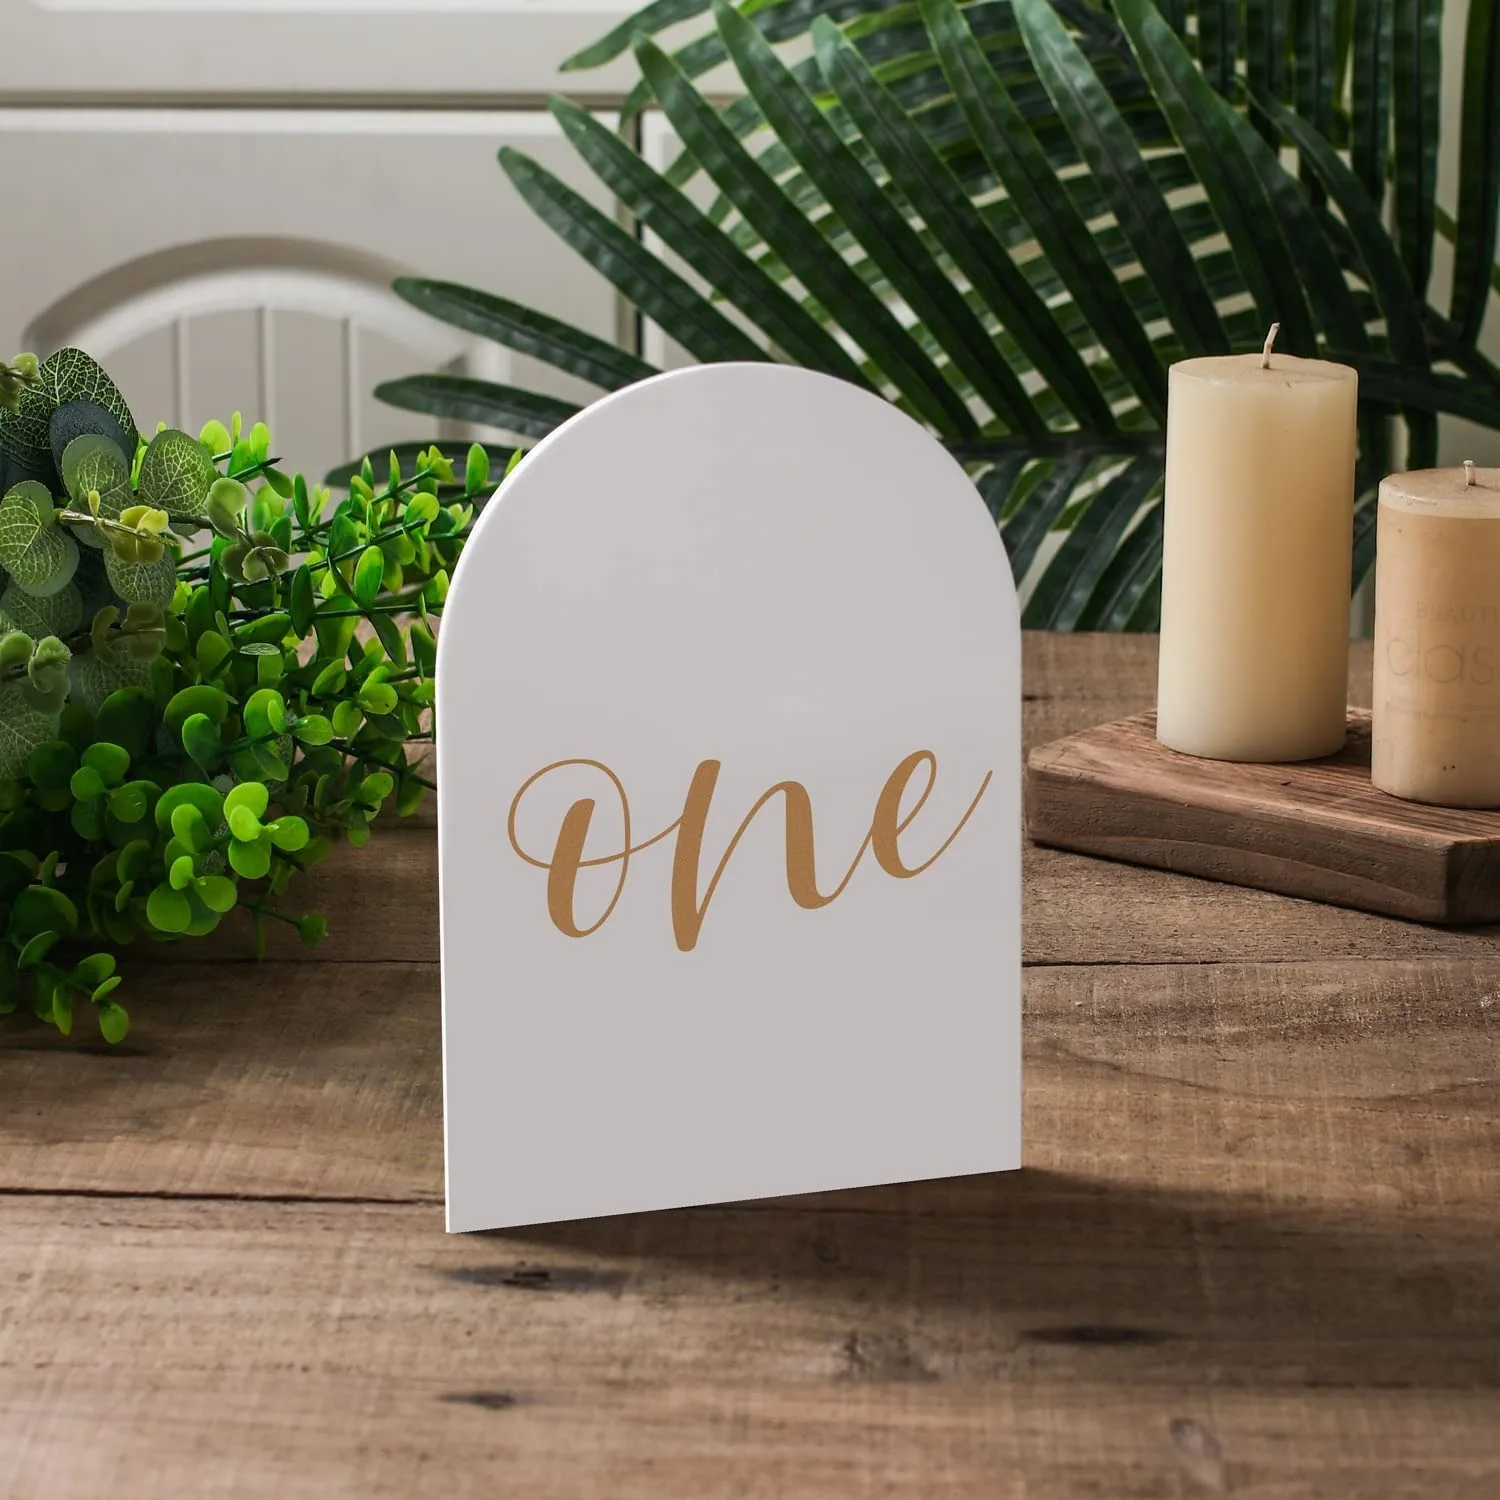 

White Blank Arch Acrylic Sign for Wedding Place Card for Party Decor Table Number Guest Name Seat Tag Craft DIY Project Display